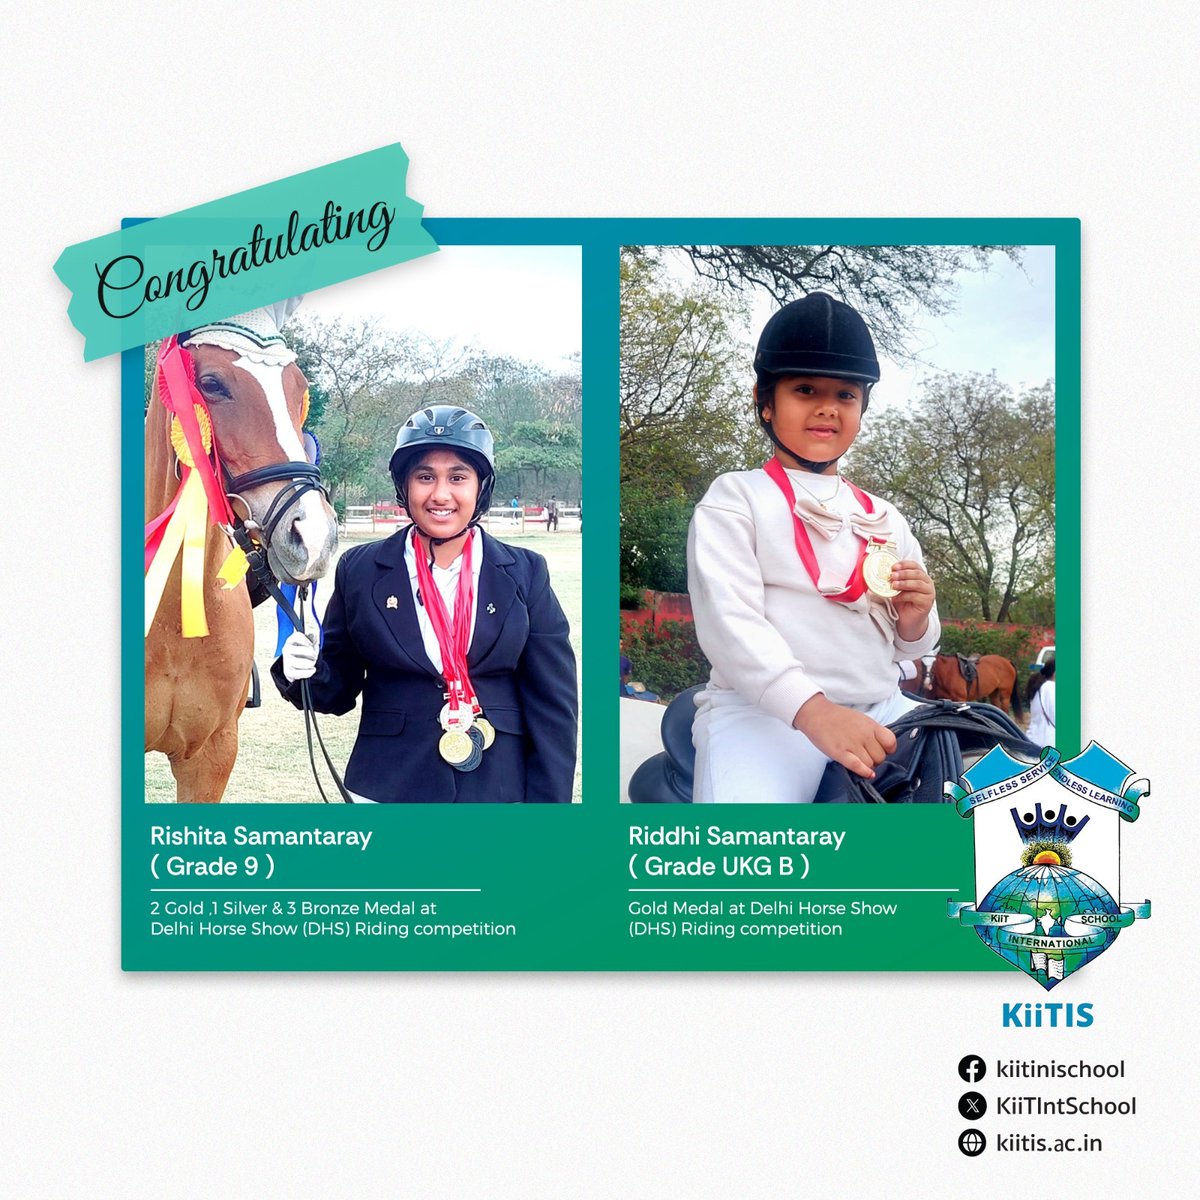 Heartiest congratulations to both Riddhi and Rishita for their outstanding performances, bringing glory to KiiT International School!

#DelhiHorseShow #Equestrian #Excellence #KiiTIS